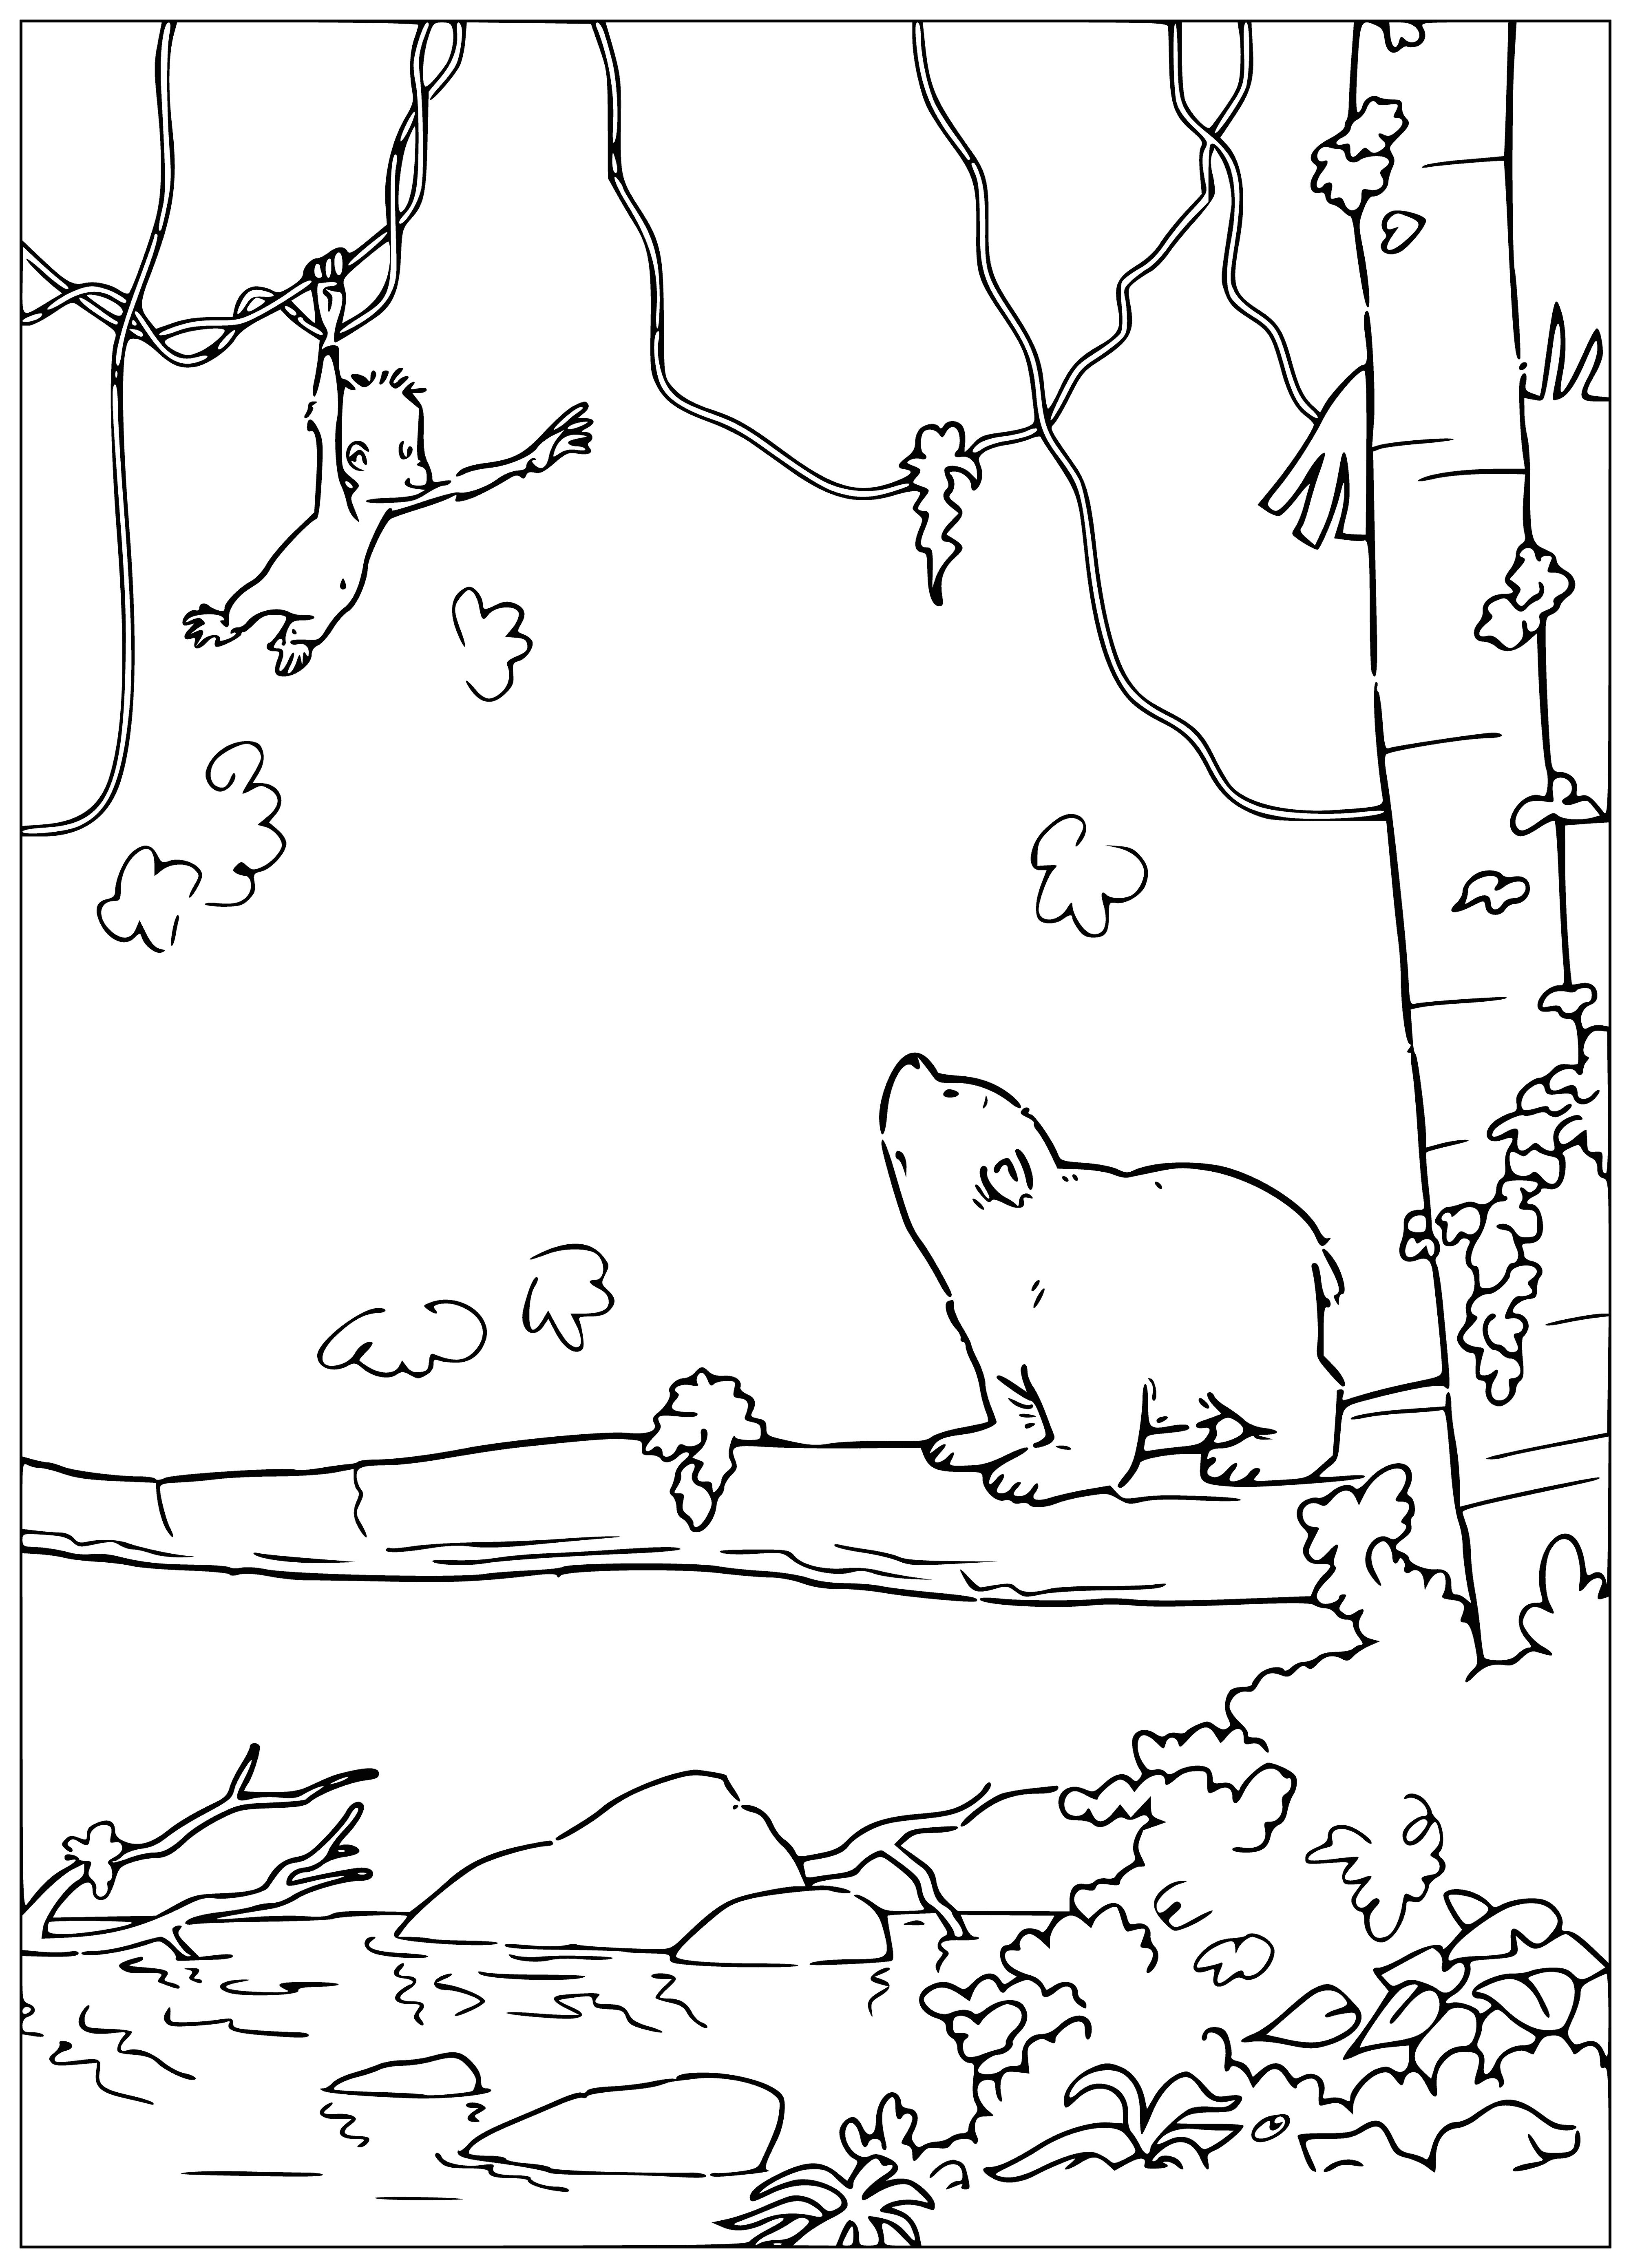 Lars and the monkey coloring page